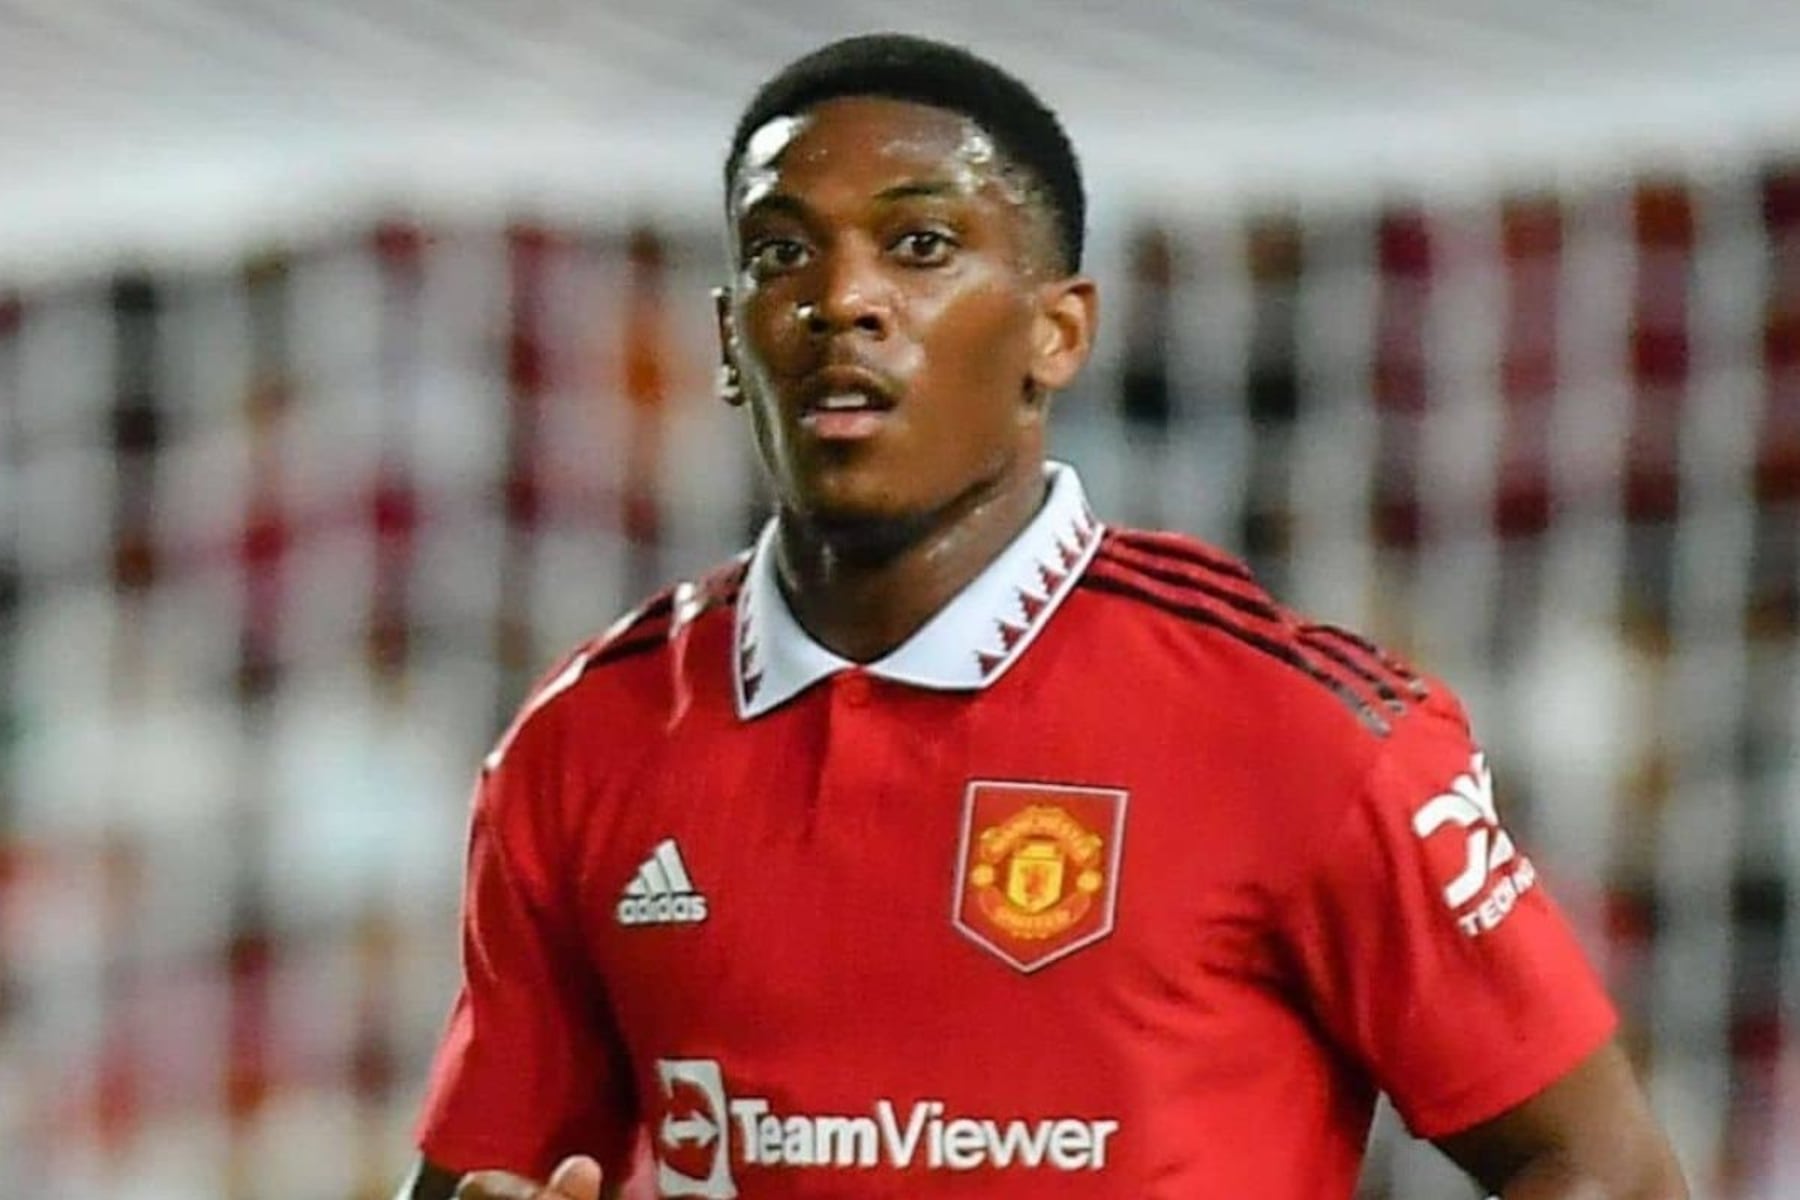 To get him out of Manchester United, Saudi Arabia's offer to Martial that shocks